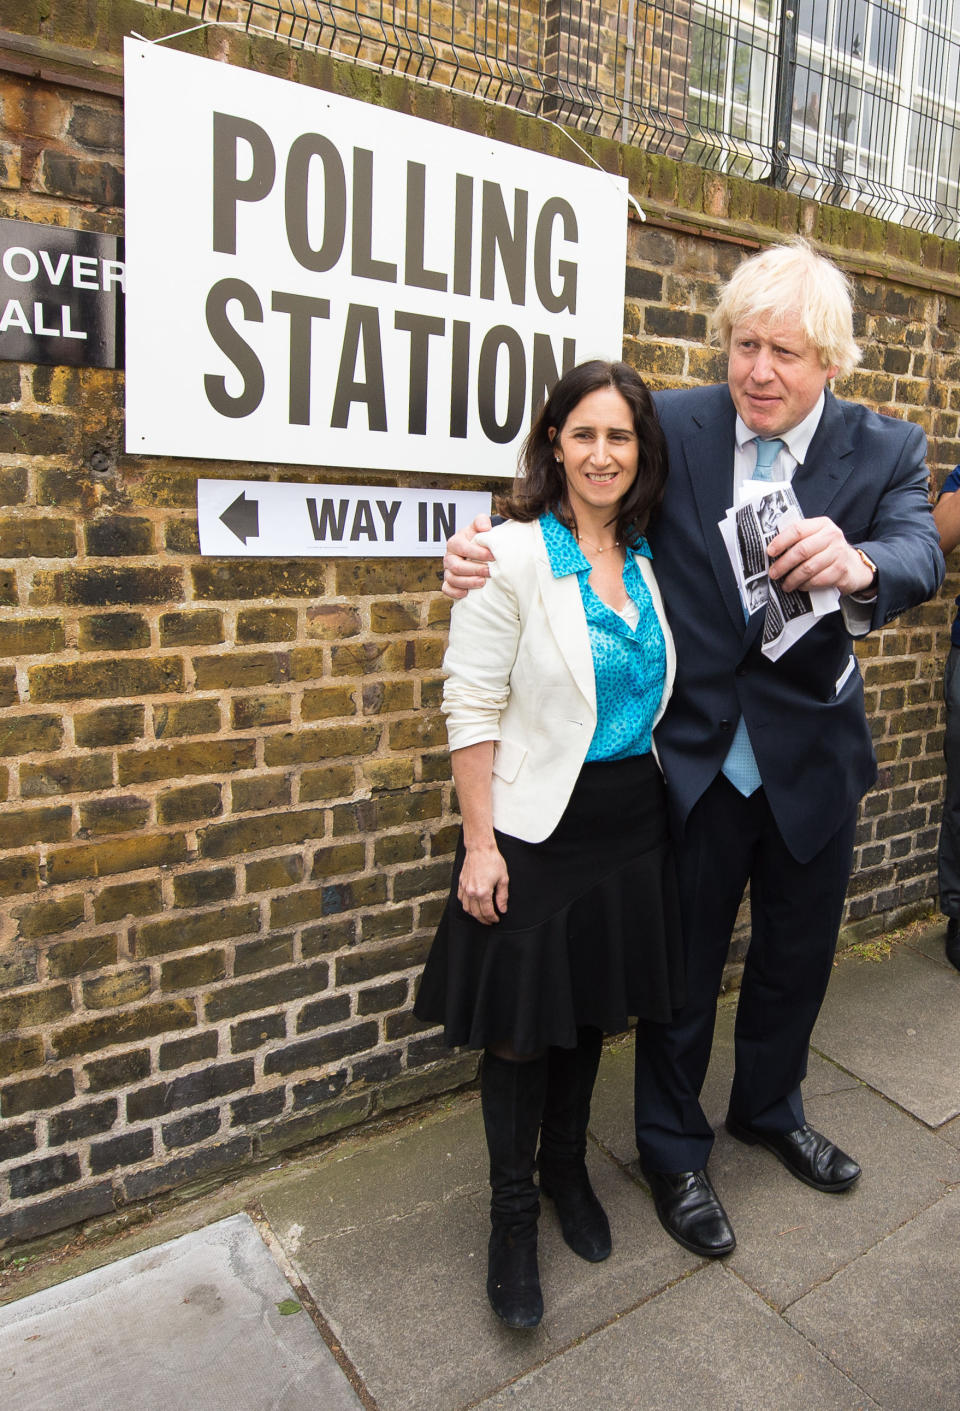 Boris Johnson and his wife Marina Wheeler leave a polling station in Islington, north London, after voting the in the General Election 2015.